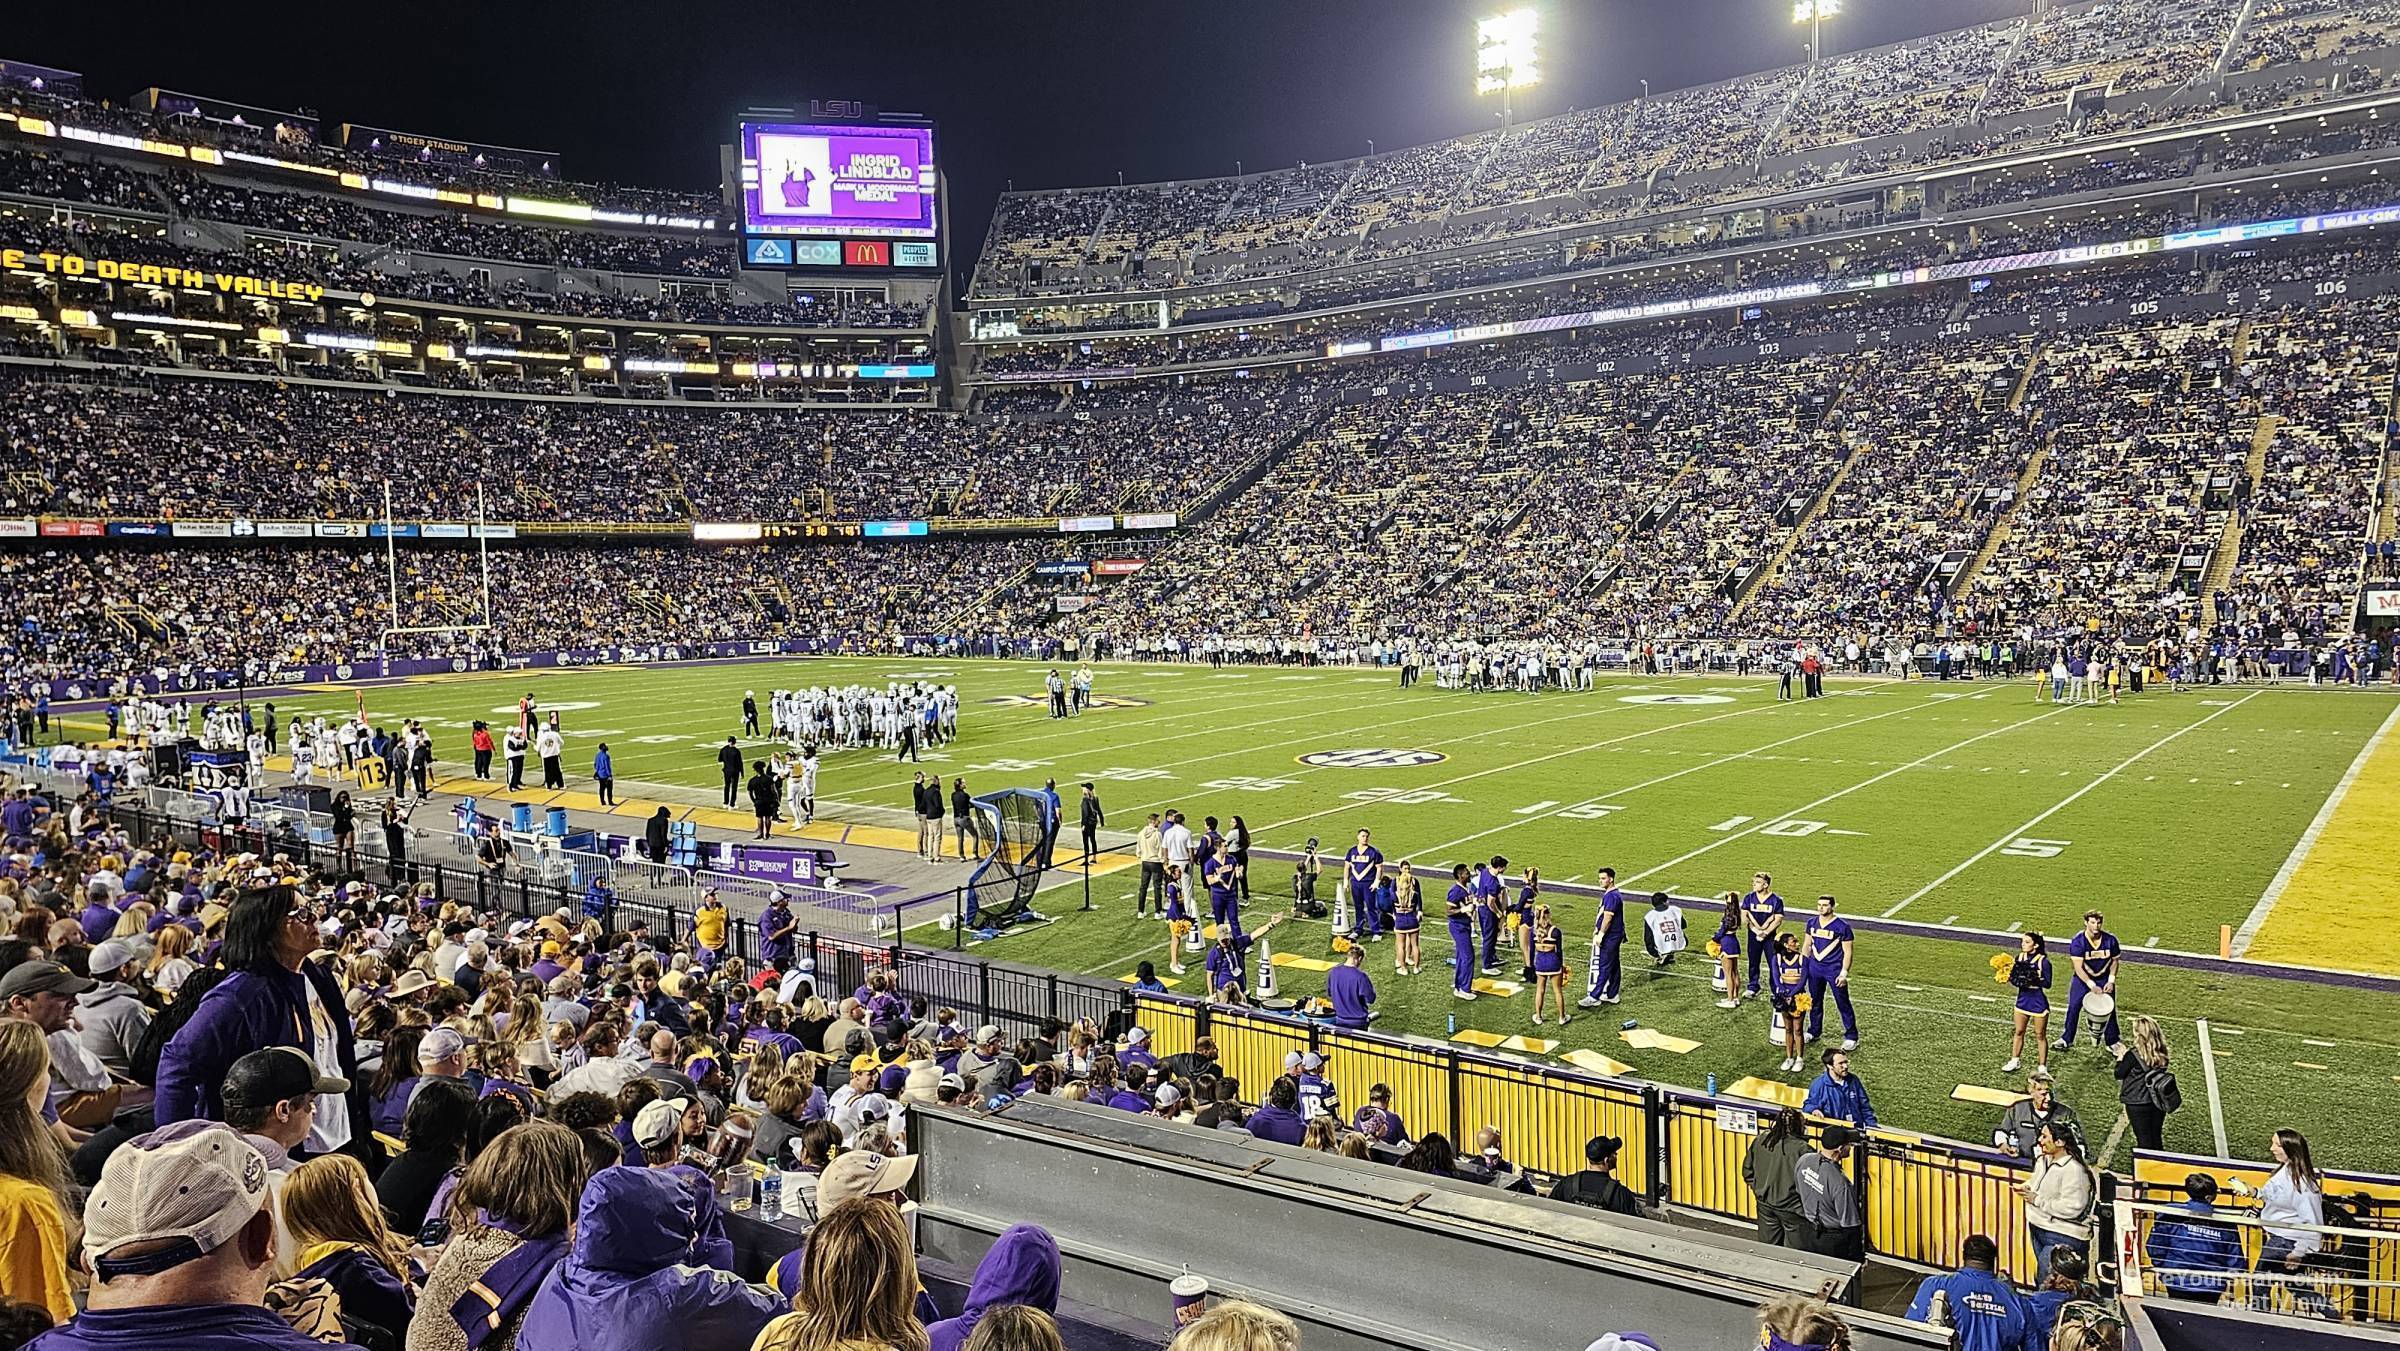 section 211, row 1 seat view  - tiger stadium